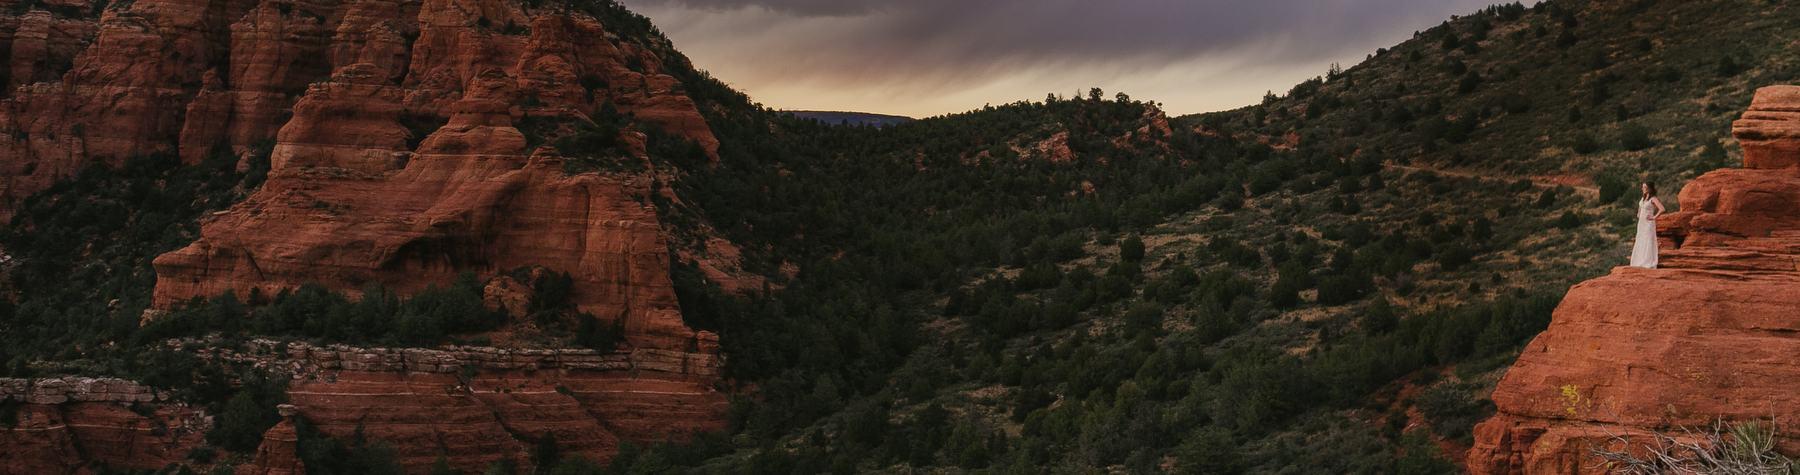 Press header image: Bride looks out over the red rocks of Sedona, AZ.